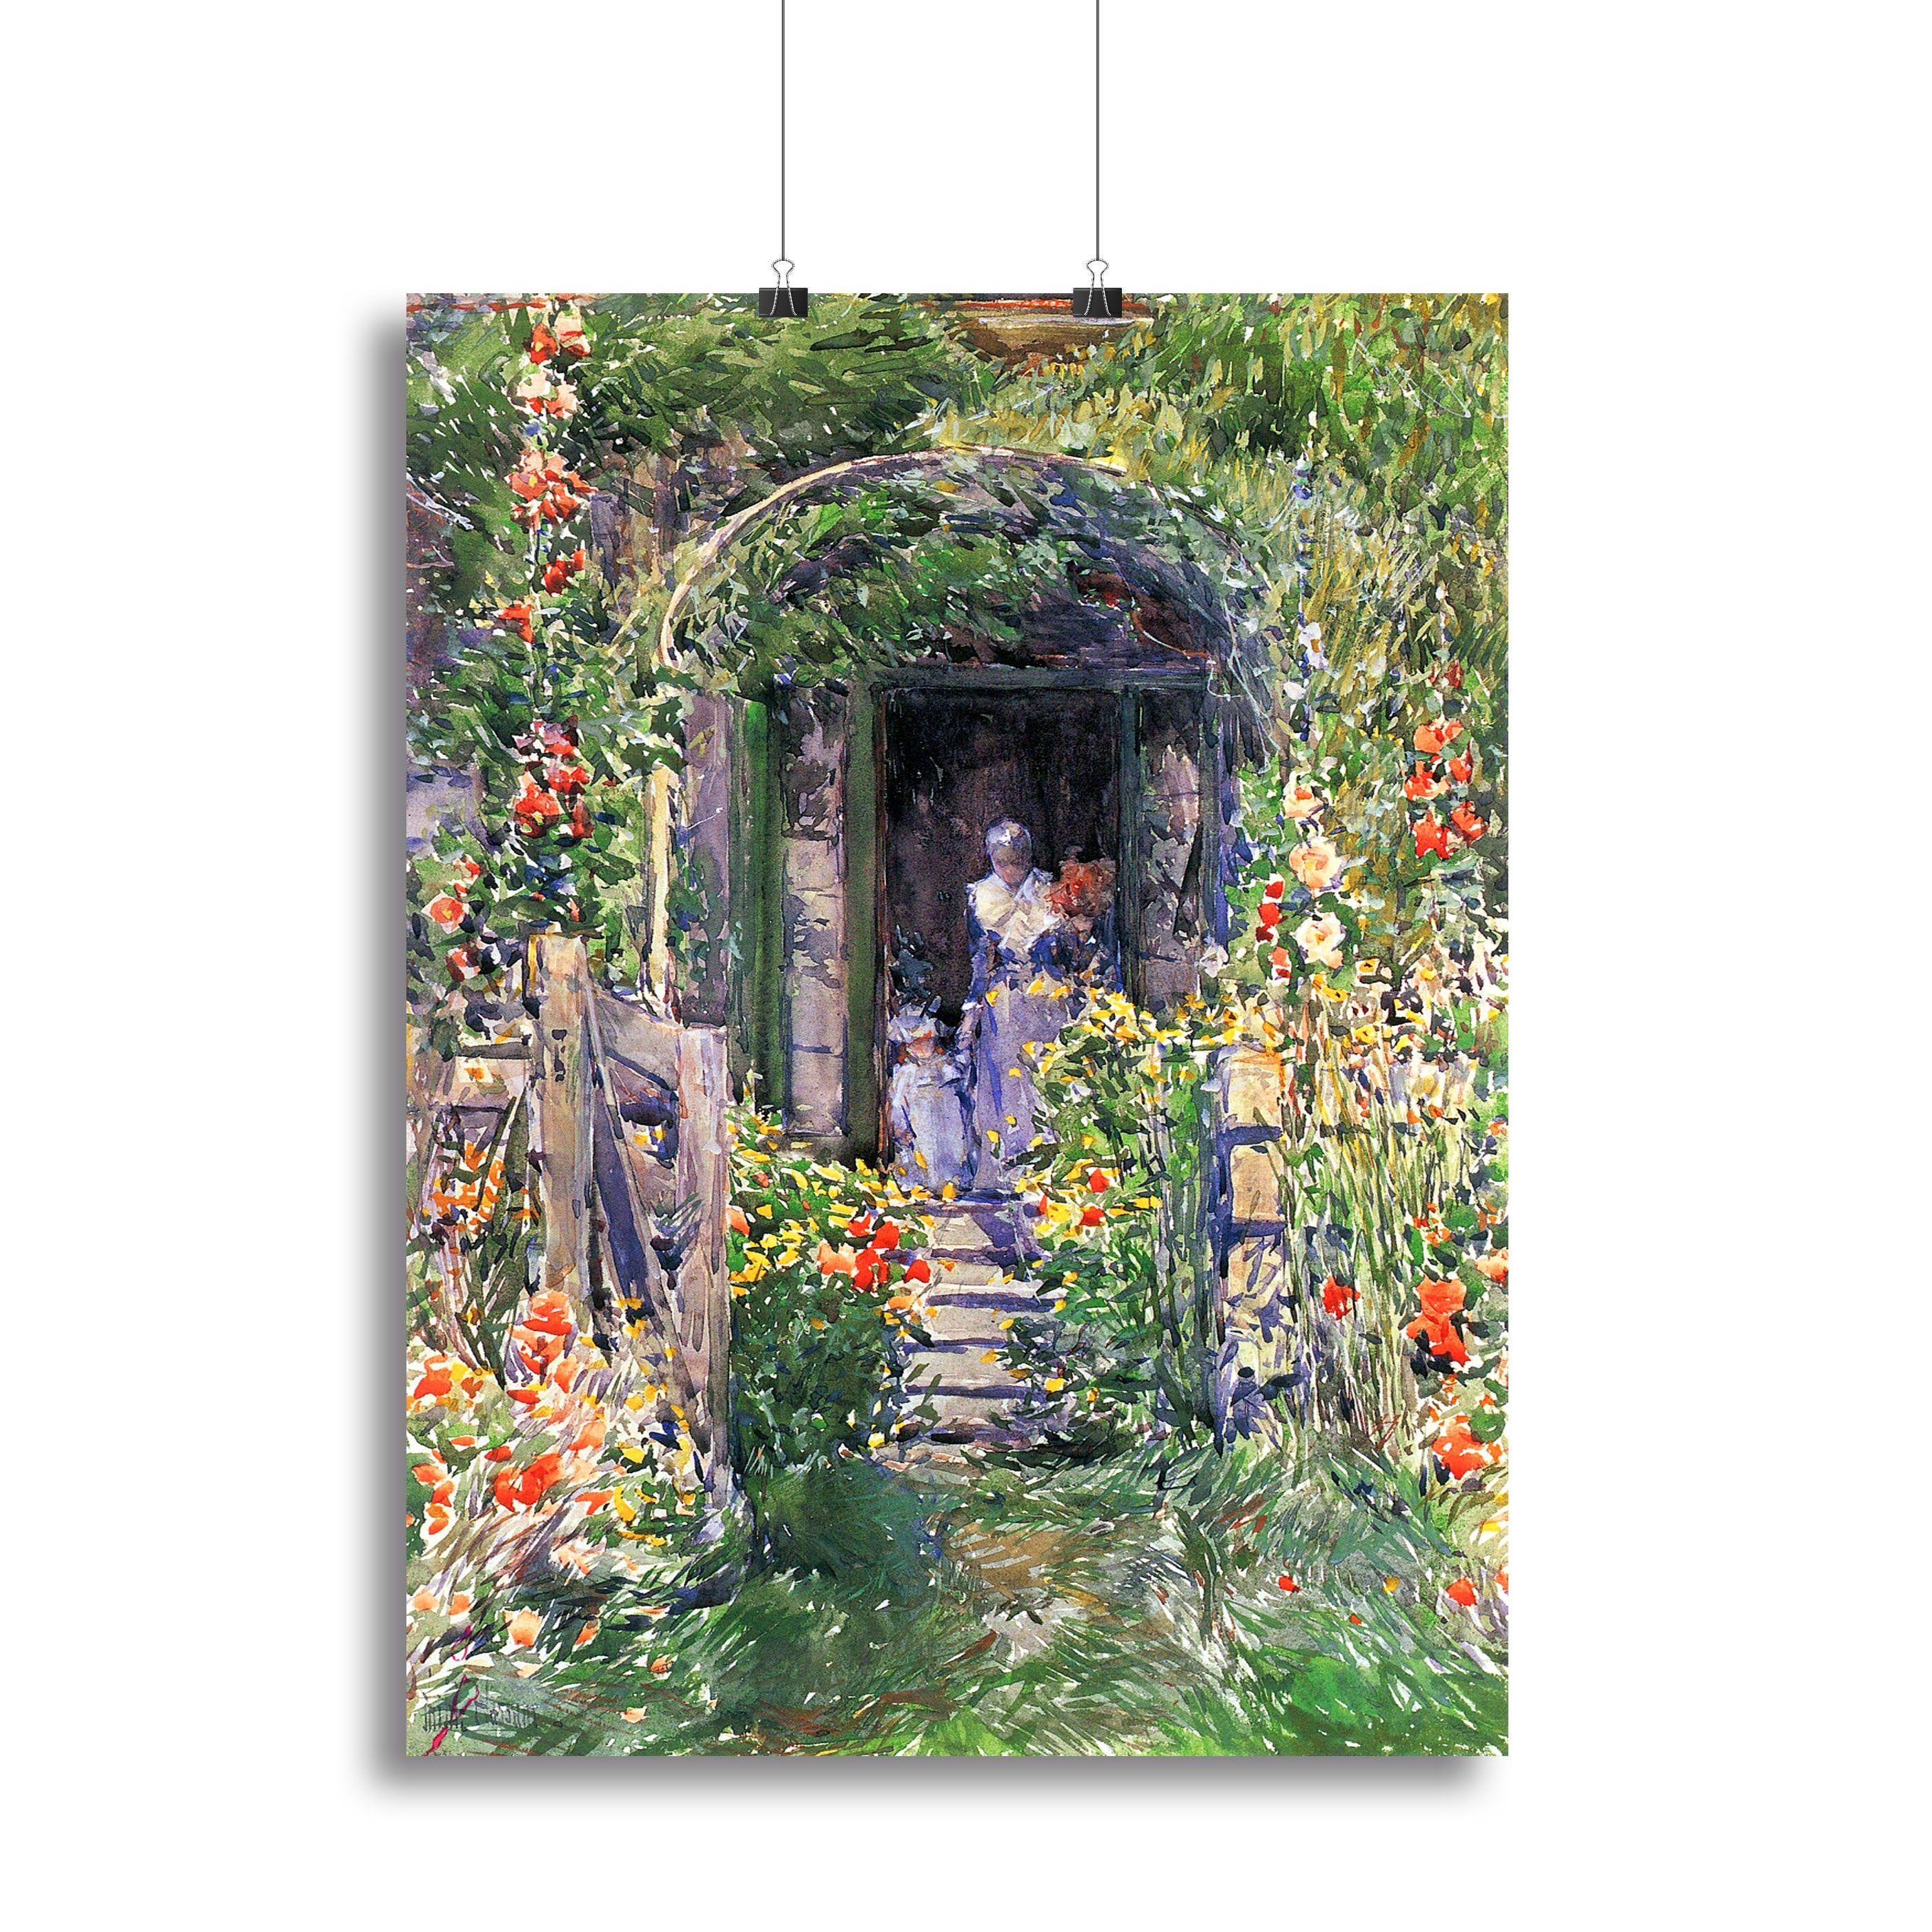 Isles of Shoals Garden by Hassam Canvas Print or Poster